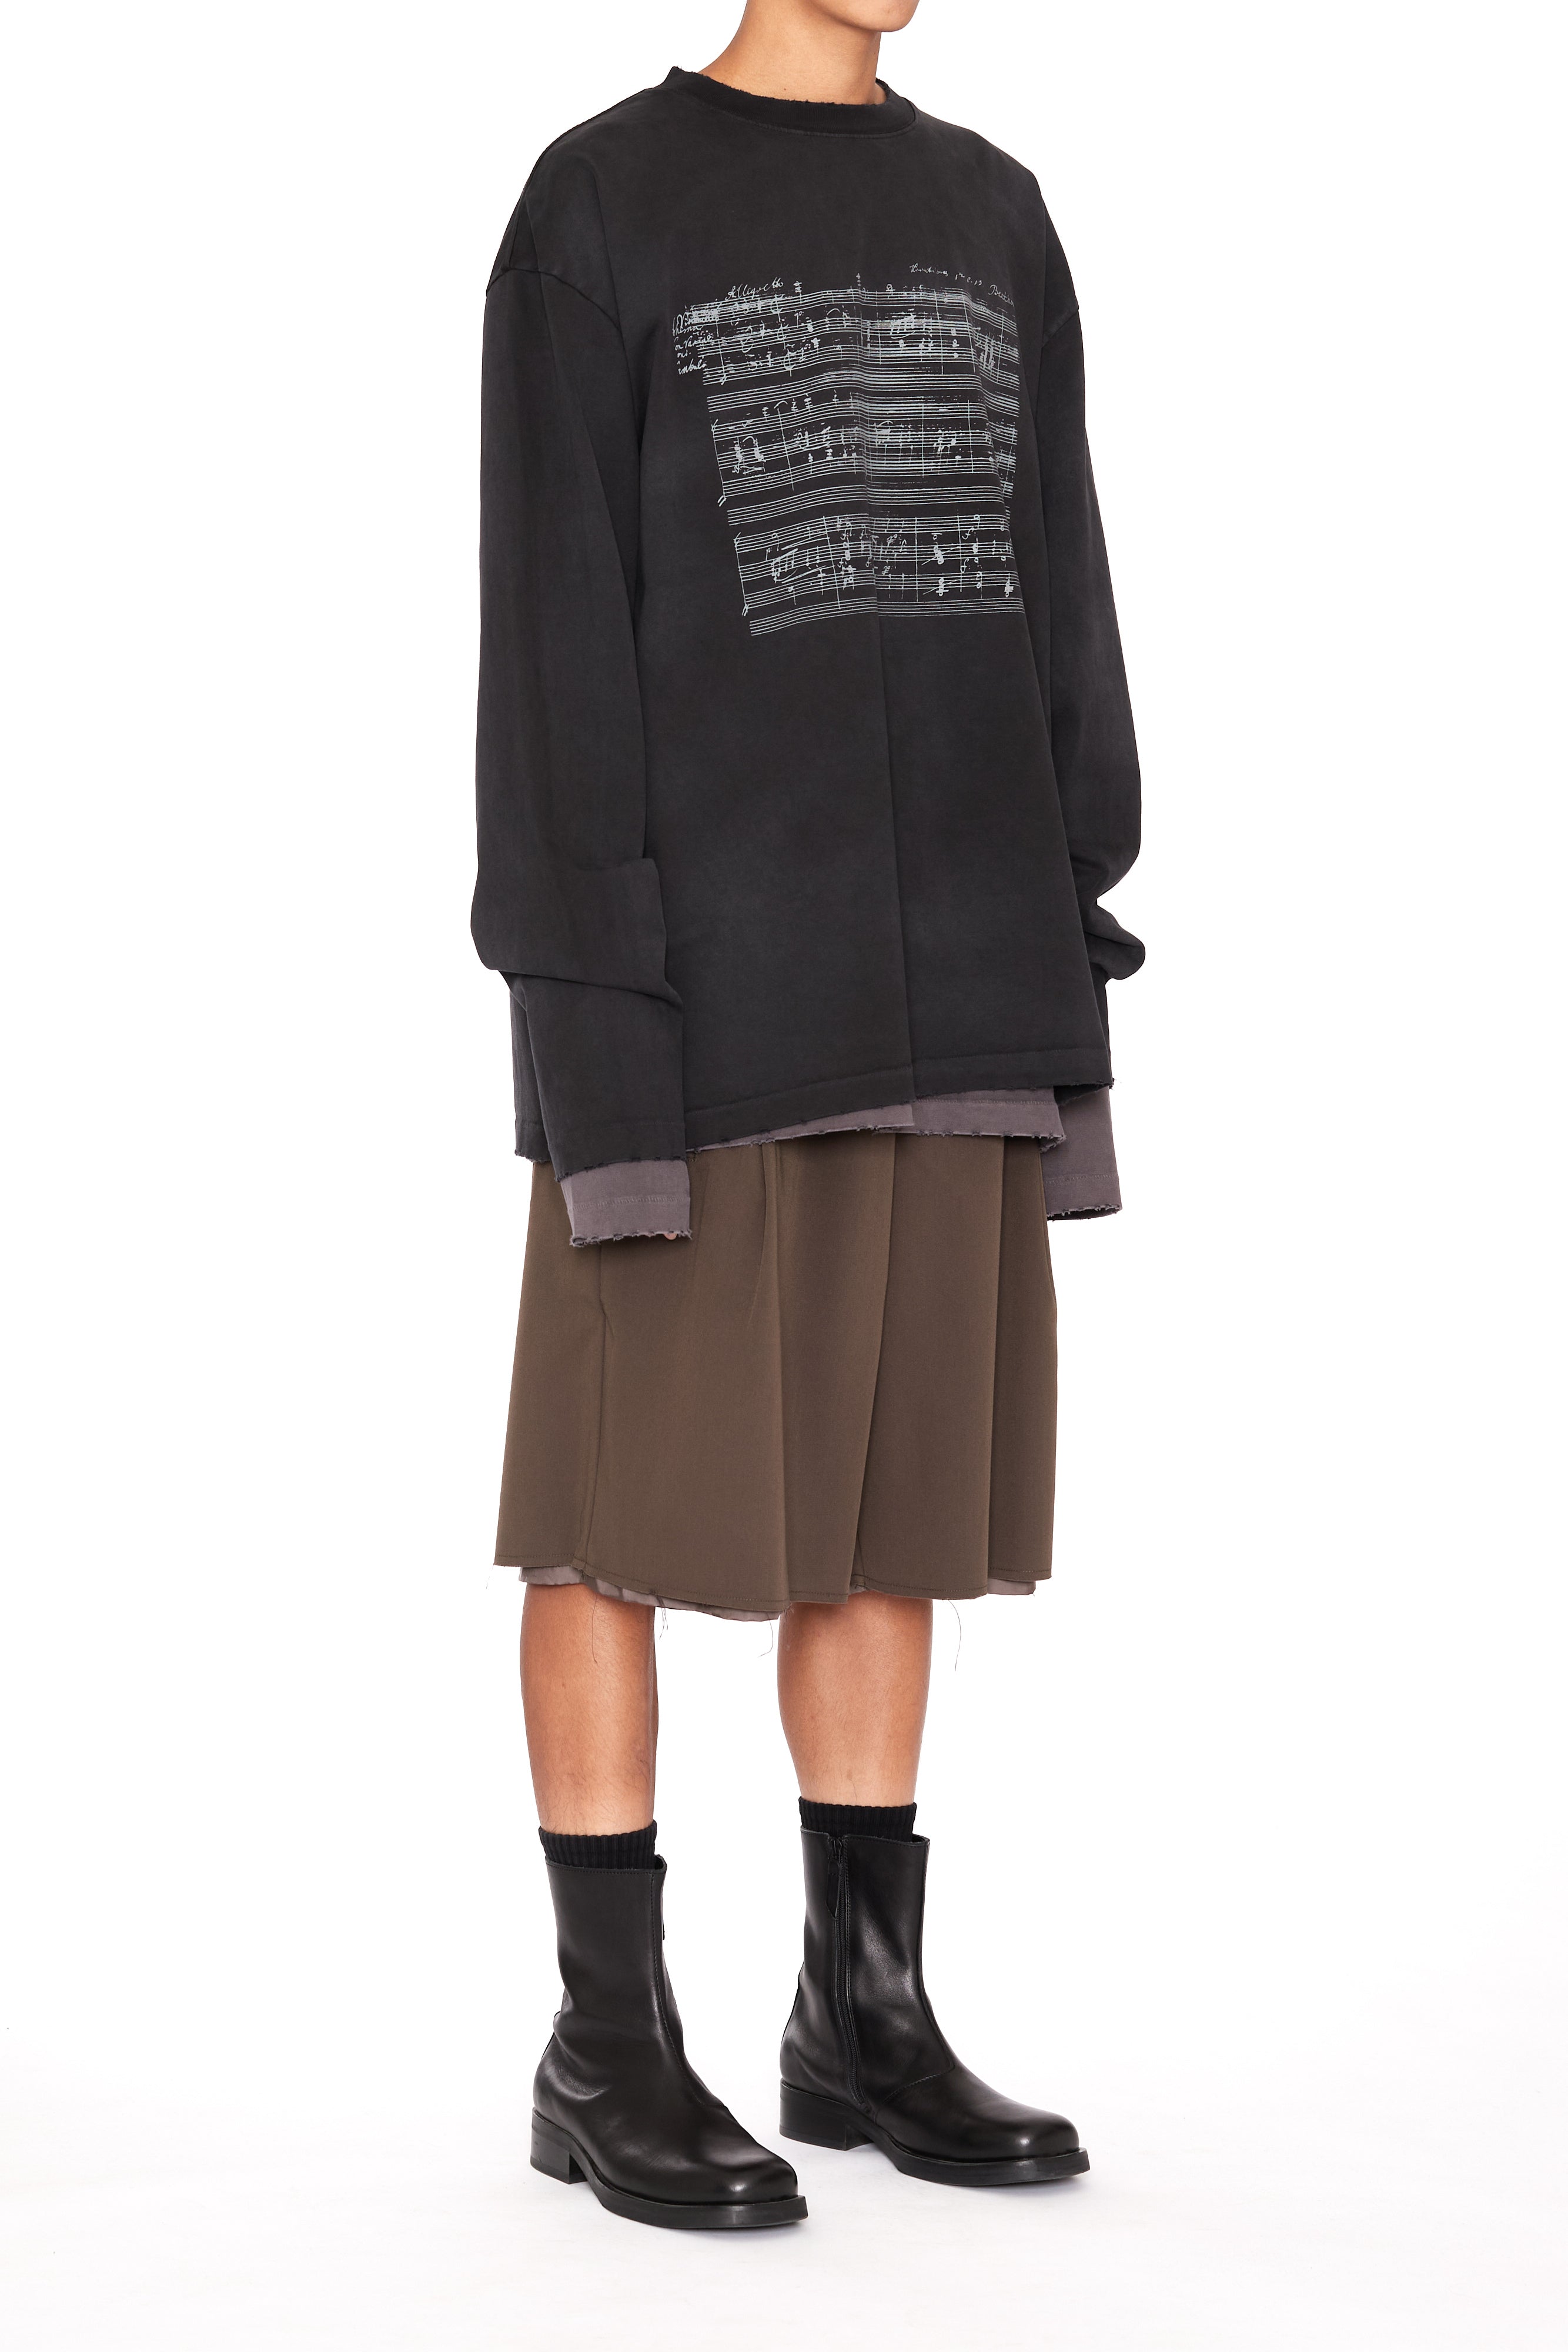 Load image into Gallery viewer, BROWN WIDE PLEATED CUT OUT SHORTS
